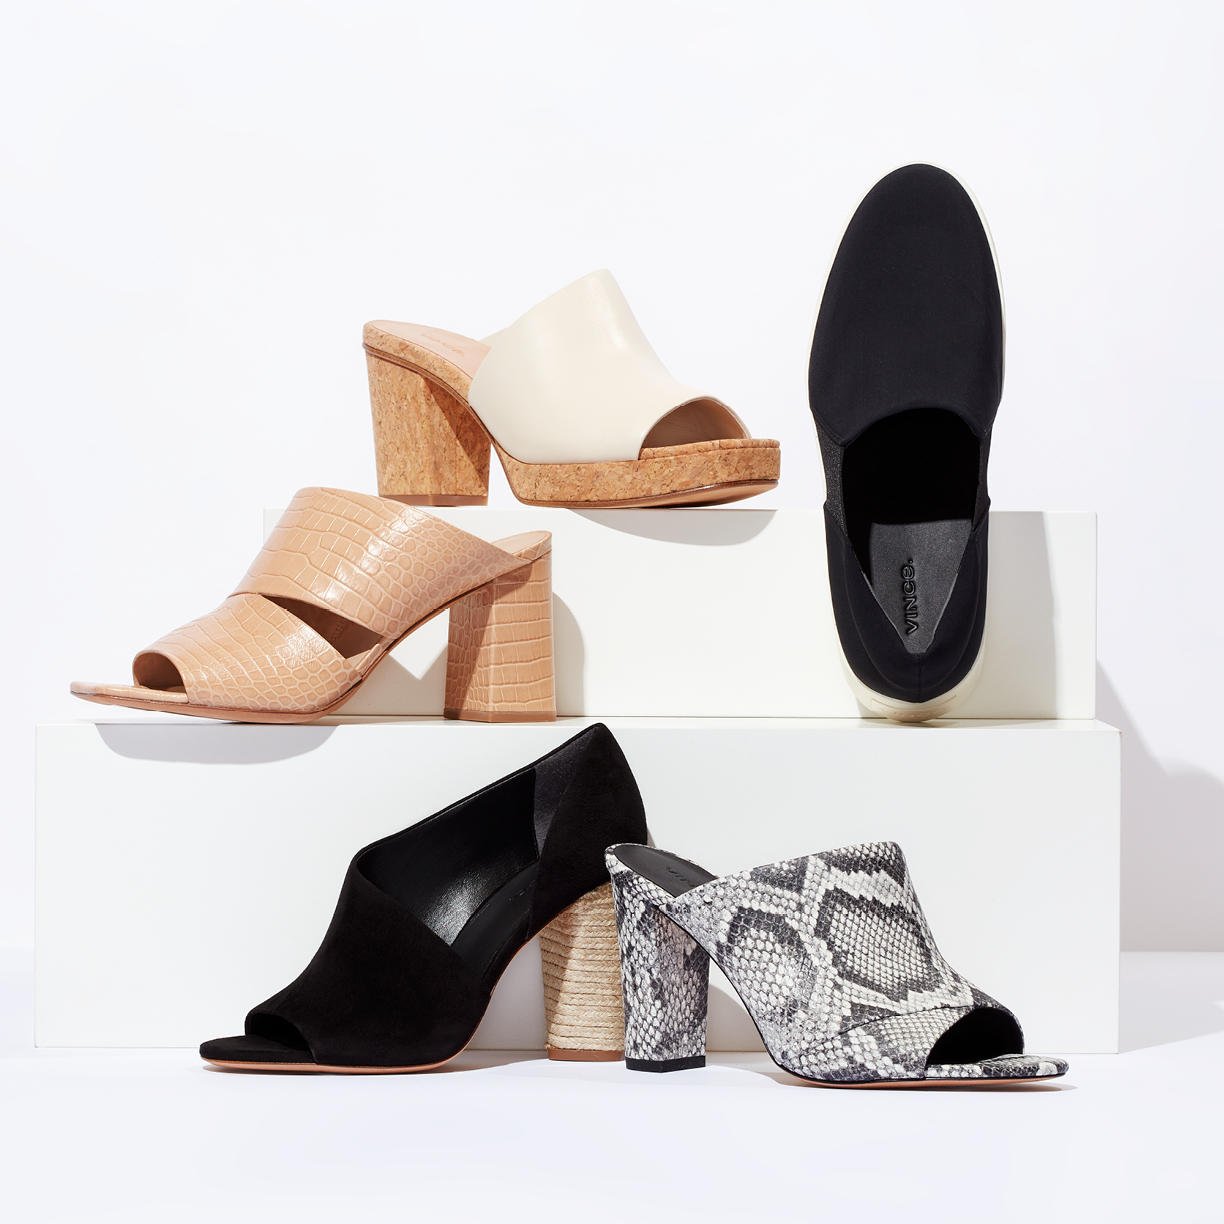 Contemporary Shoes Up to 60% Off